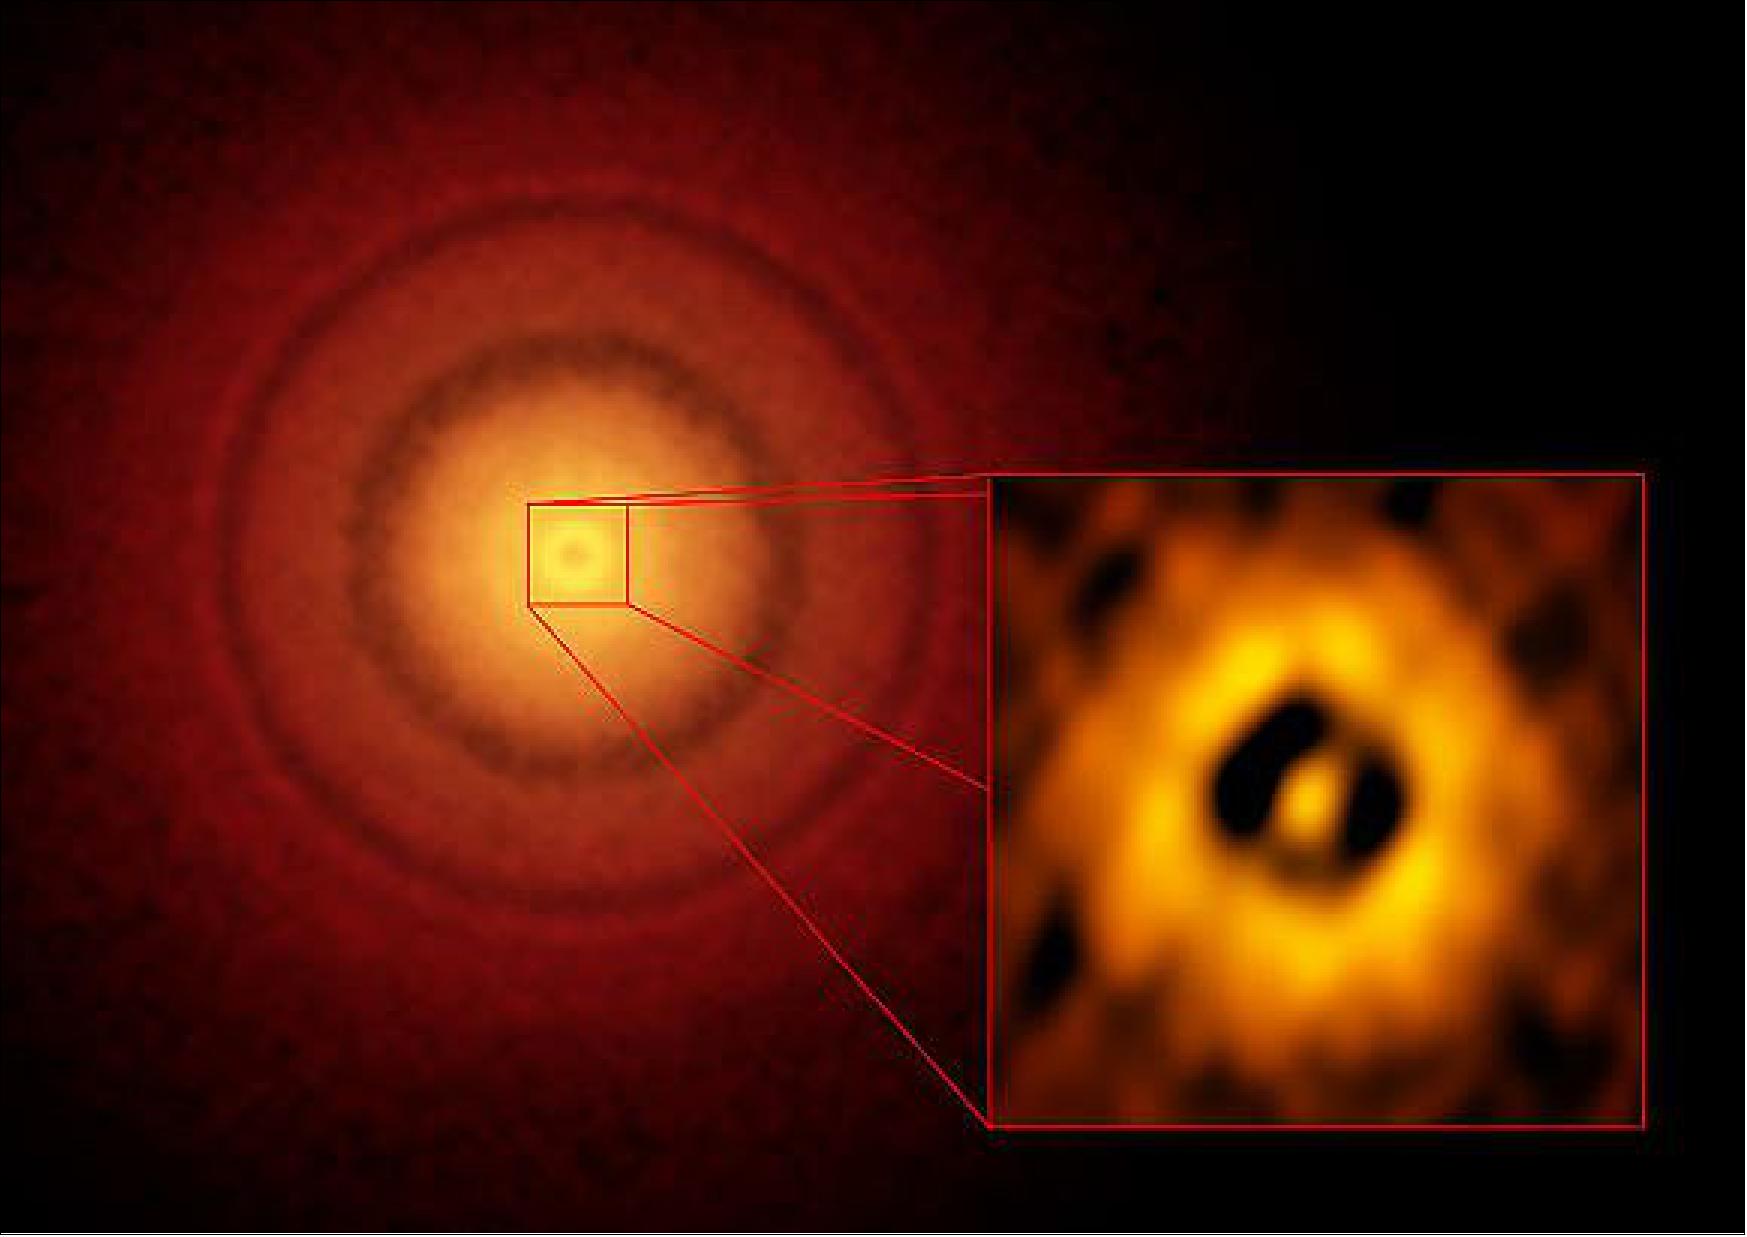 Figure 53: This ALMA image shows the planet-forming disc around TW Hydrae. The inset image zooms in on the gap nearest to the star, which is at the same distance as the Earth is from the Sun, suggesting an infant version of an Earth-like exoplanet could be emerging from the dust and gas. The additional concentric light and dark features represent other planet-forming regions farther out in the disc (image credit: S. Andrews, Harvard-Smithsonian Center for Astrophysics / ALMA / ESO / NAOJ / NRAO) 67)